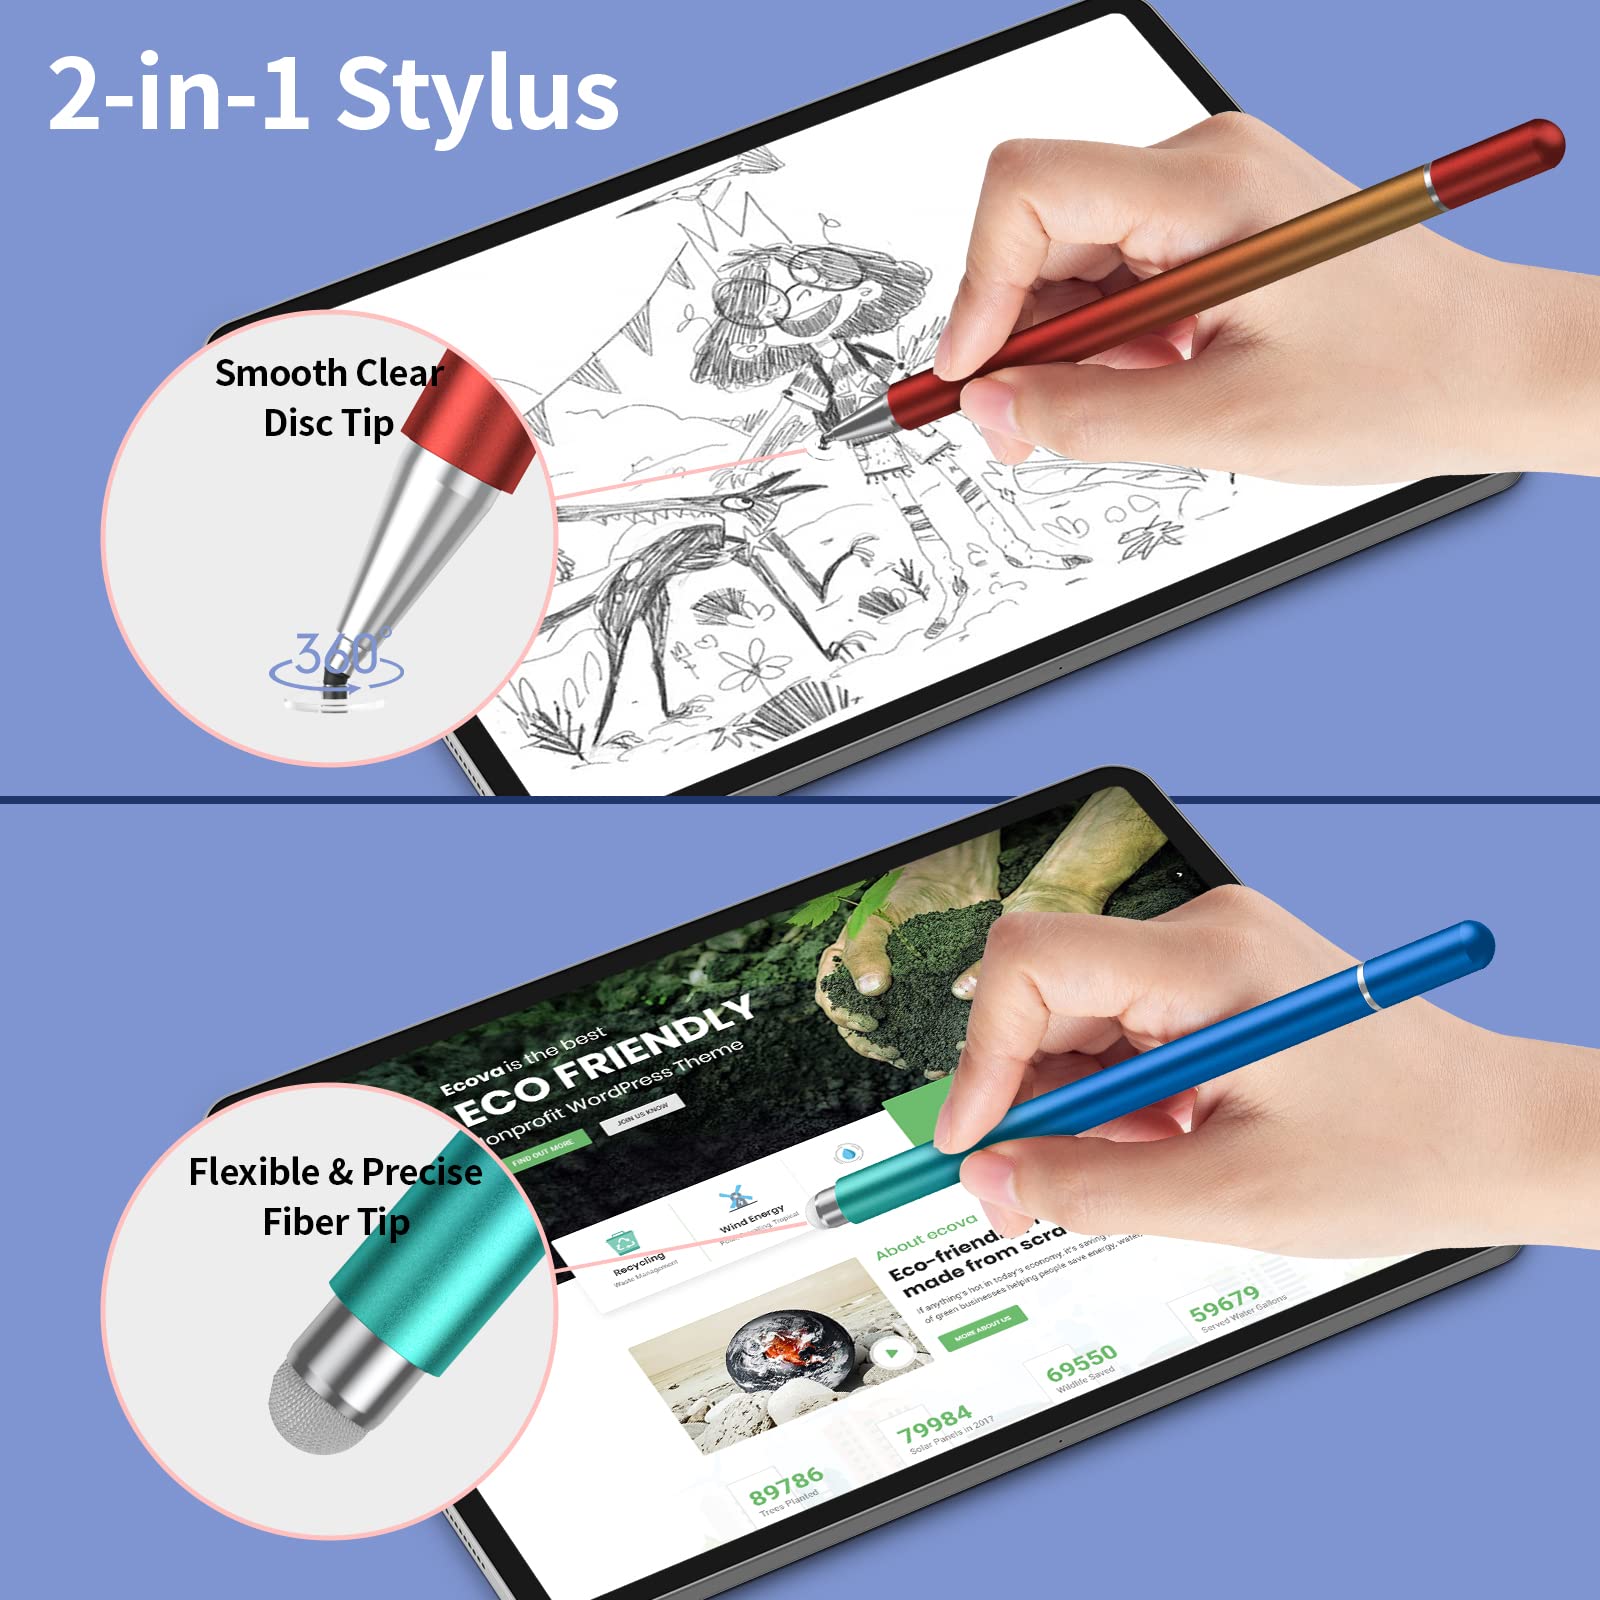 Stylus Pens for Touch Screens, 2 in 1 Magnetic Disc Stylus Pen with Magnetic Cap, Compatible with All Touch Screens